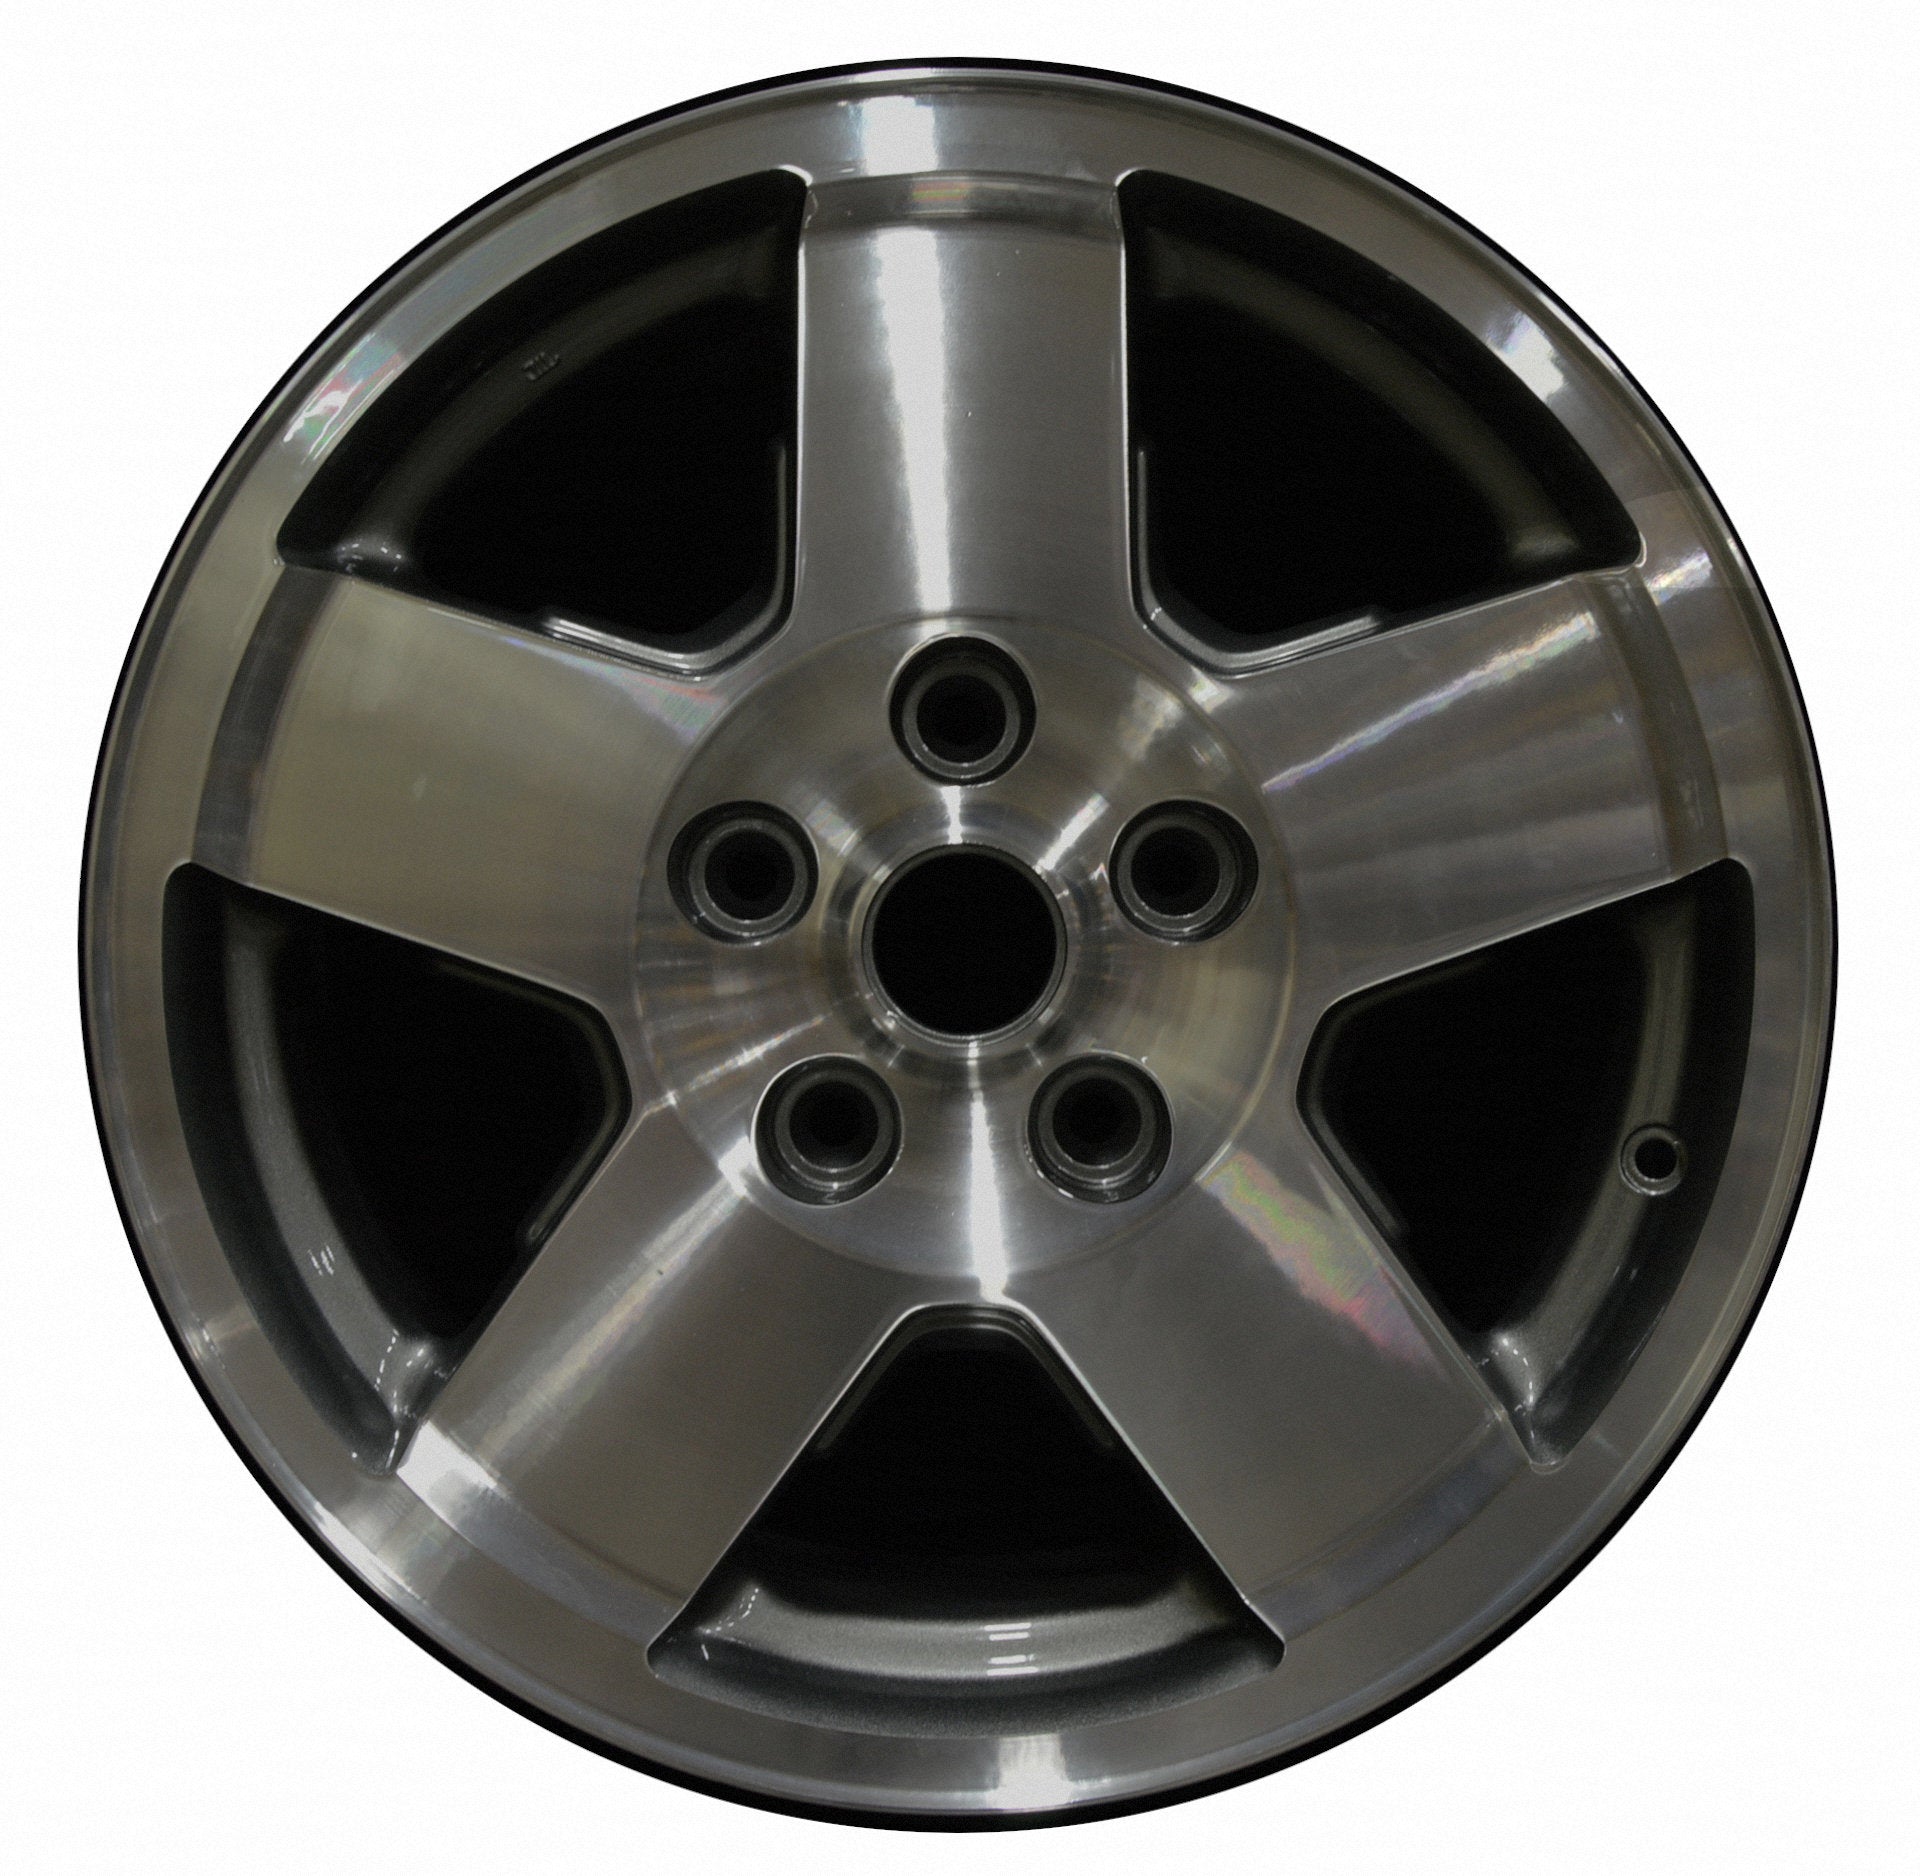 Jeep Commander  2006, 2007, 2008, 2009, 2010 Factory OEM Car Wheel Size 17x7.5 Alloy WAO.9096.LC29.MA